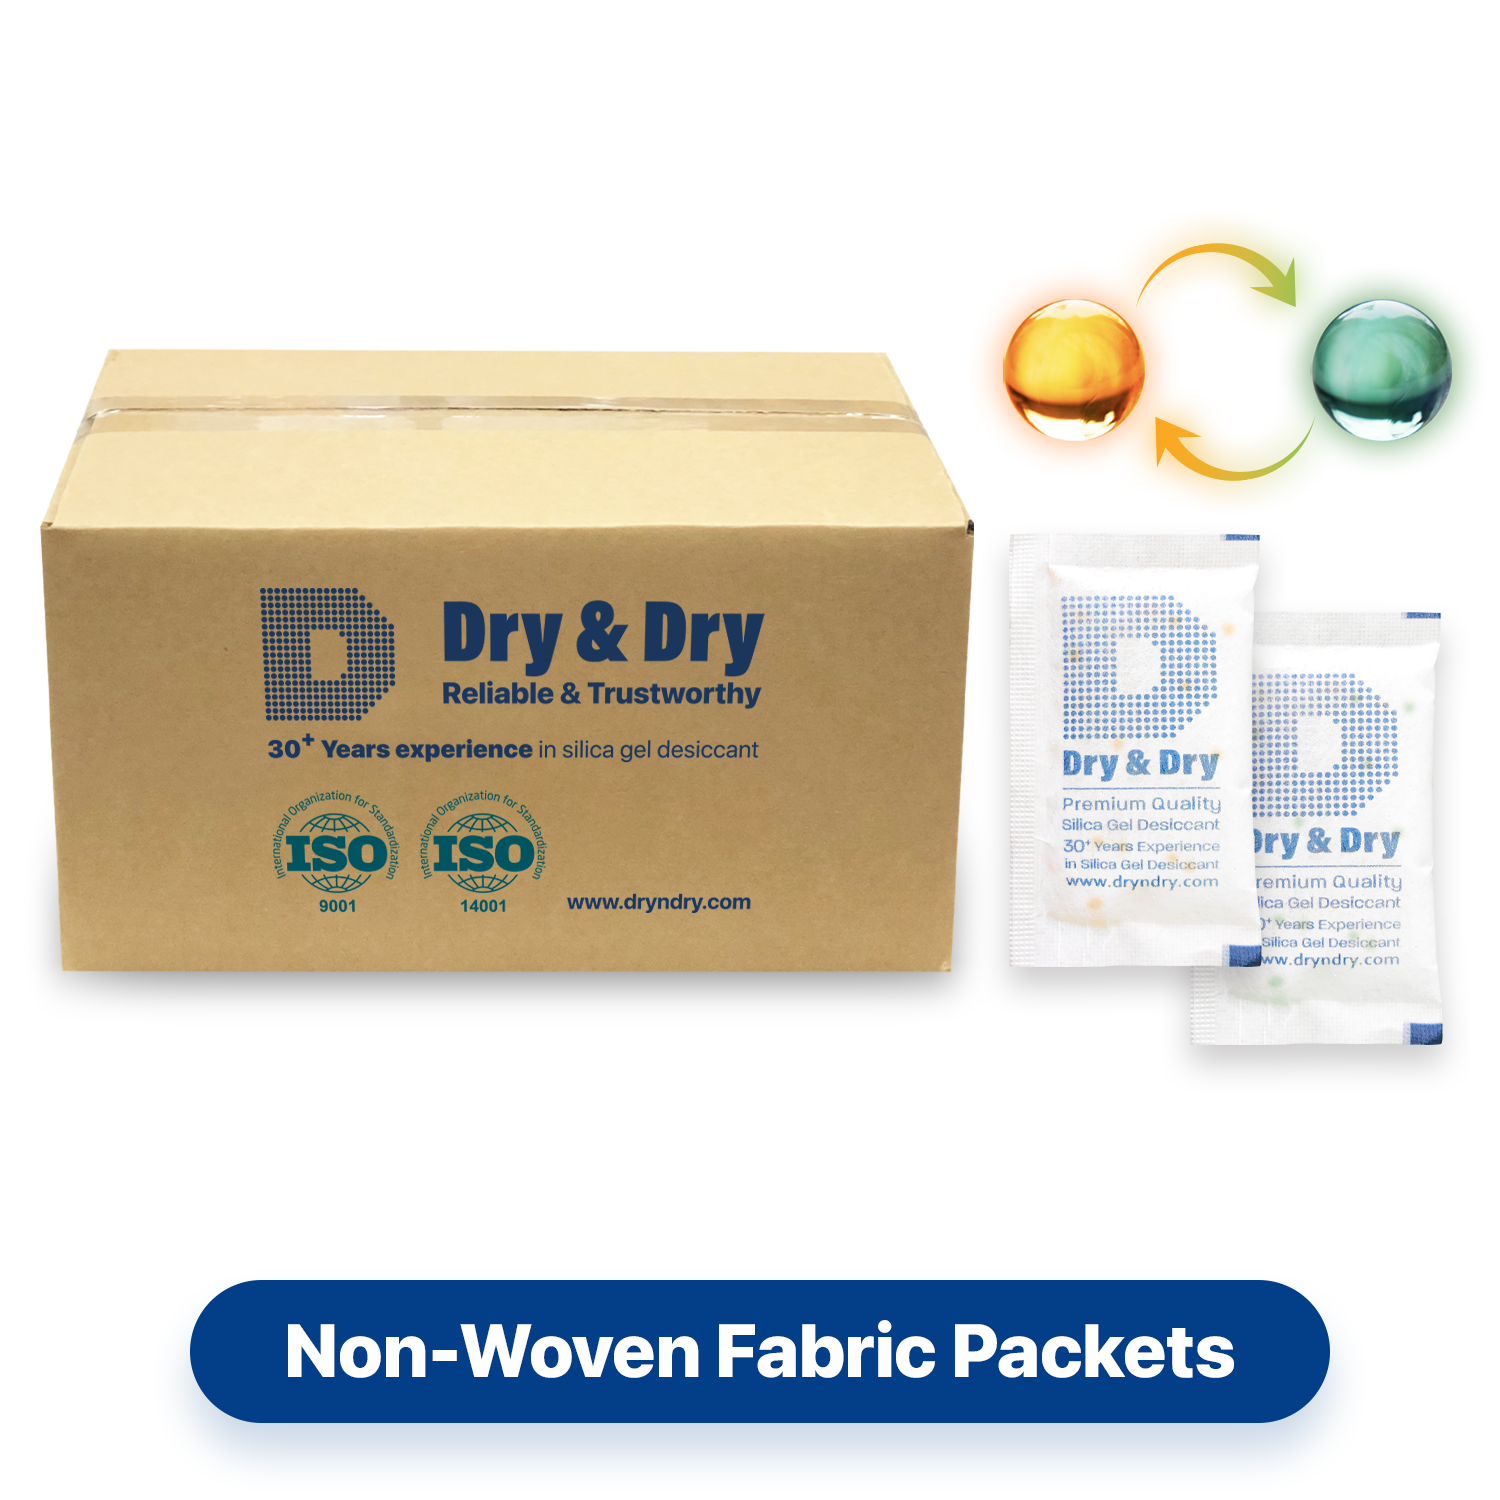 10 Gram [1700 Packets] "Dry & Dry" Premium Orange Indicating Silica Gel Desiccant Packets - Rechargeable Non-Woven Fabric (Cloth)